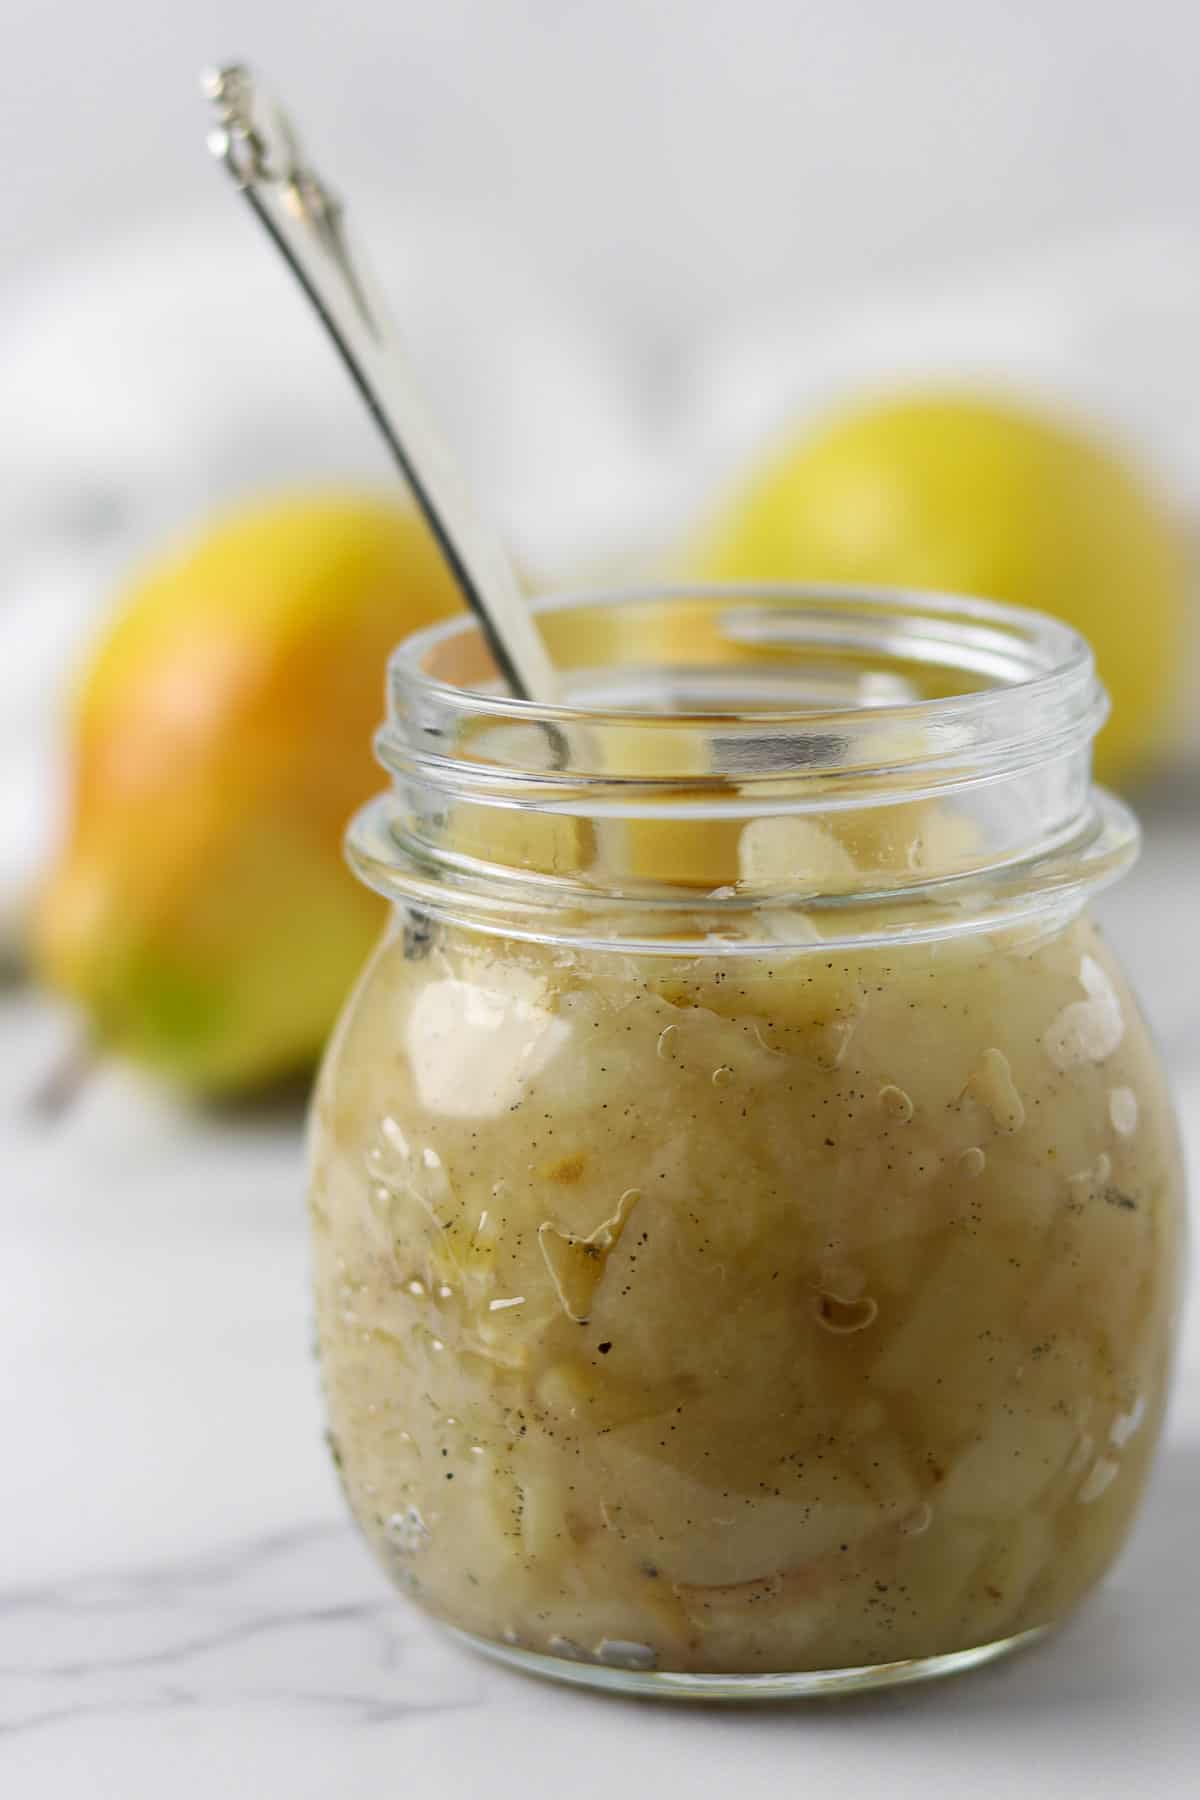 Close up of a glass jar of pear compote.